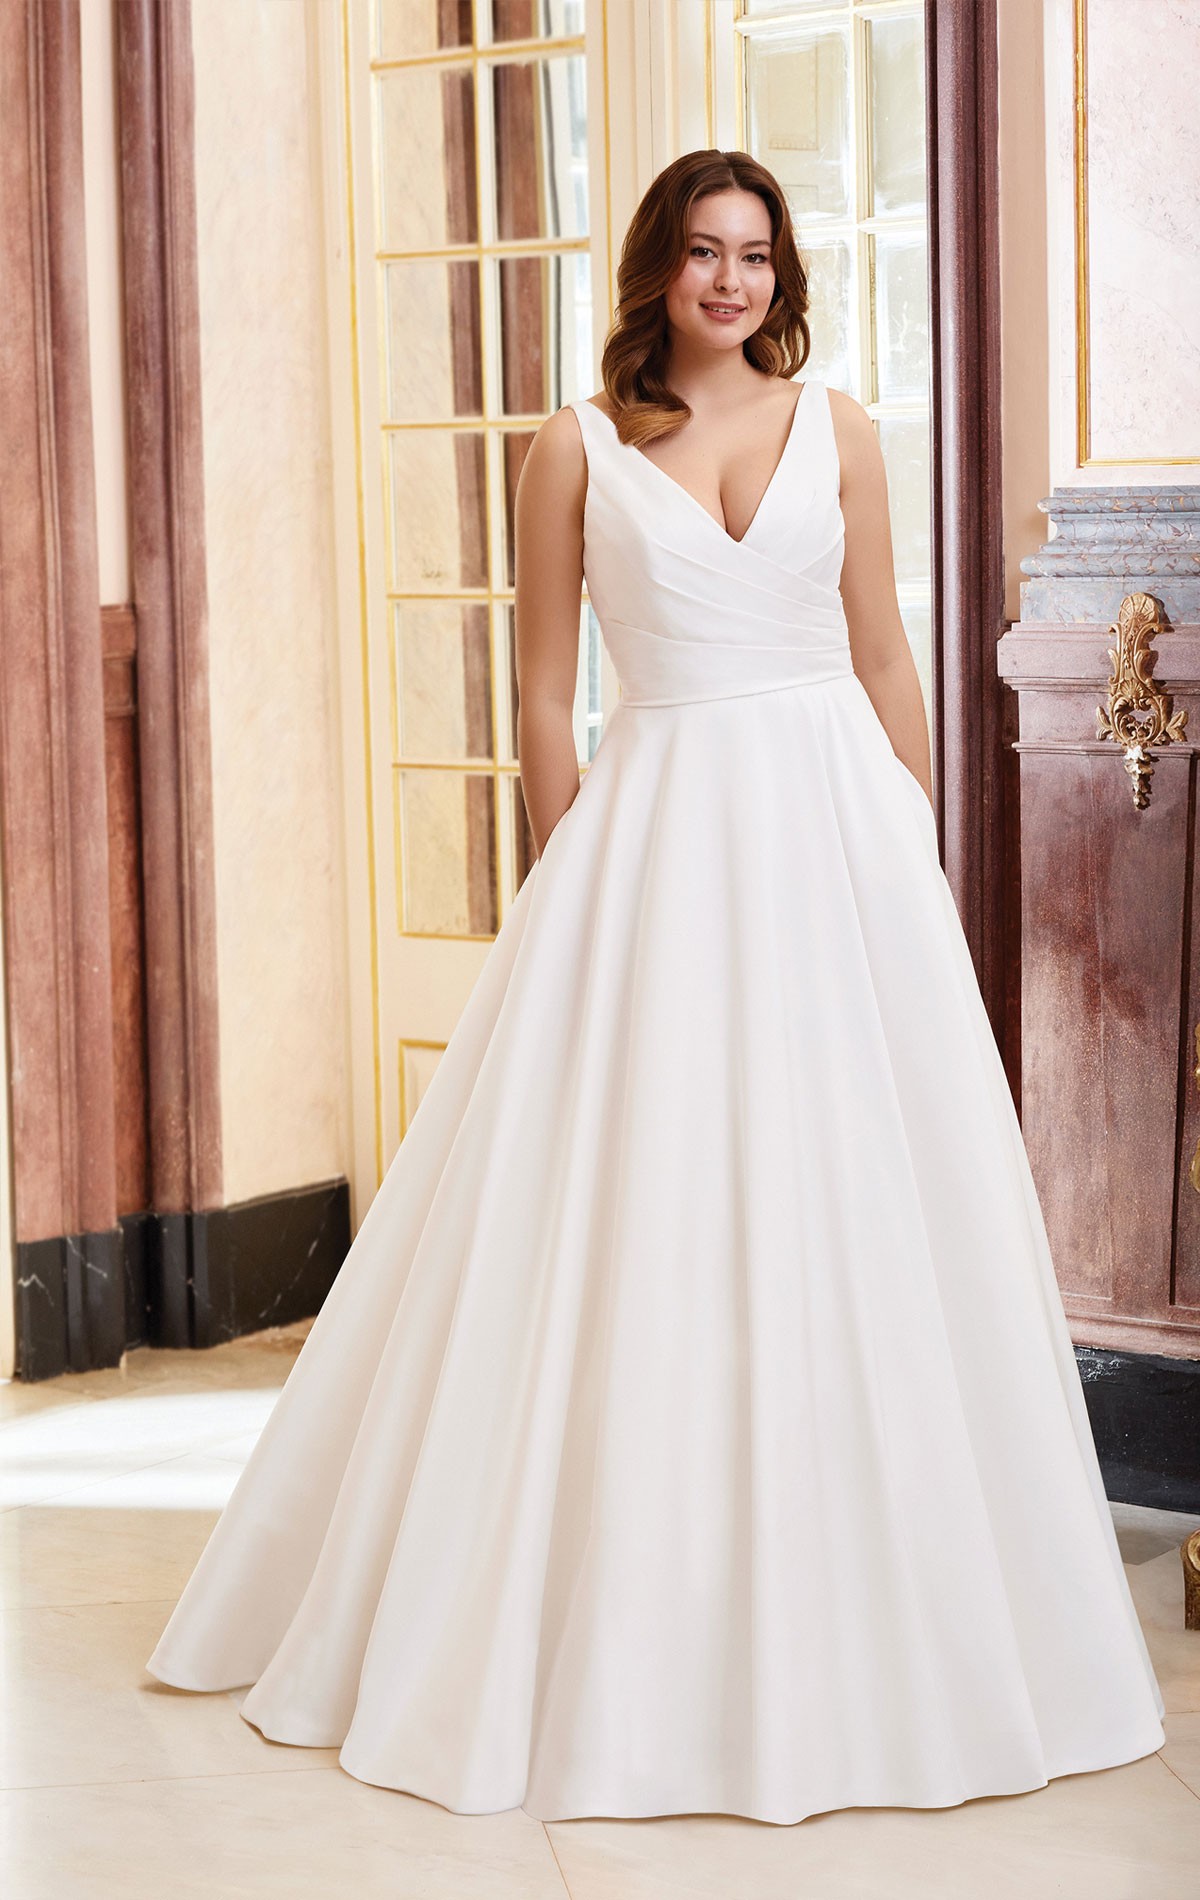 44080 - Dior - Justin Alexander Sincerity Bridal 44080, Simple Mikado Ball Gown Wedding Dress with pockets. Plus size wedding dress at Blessings Bridal Boutique, Brighton E. Sussex BN1 5GG Telephone: 01273 505766